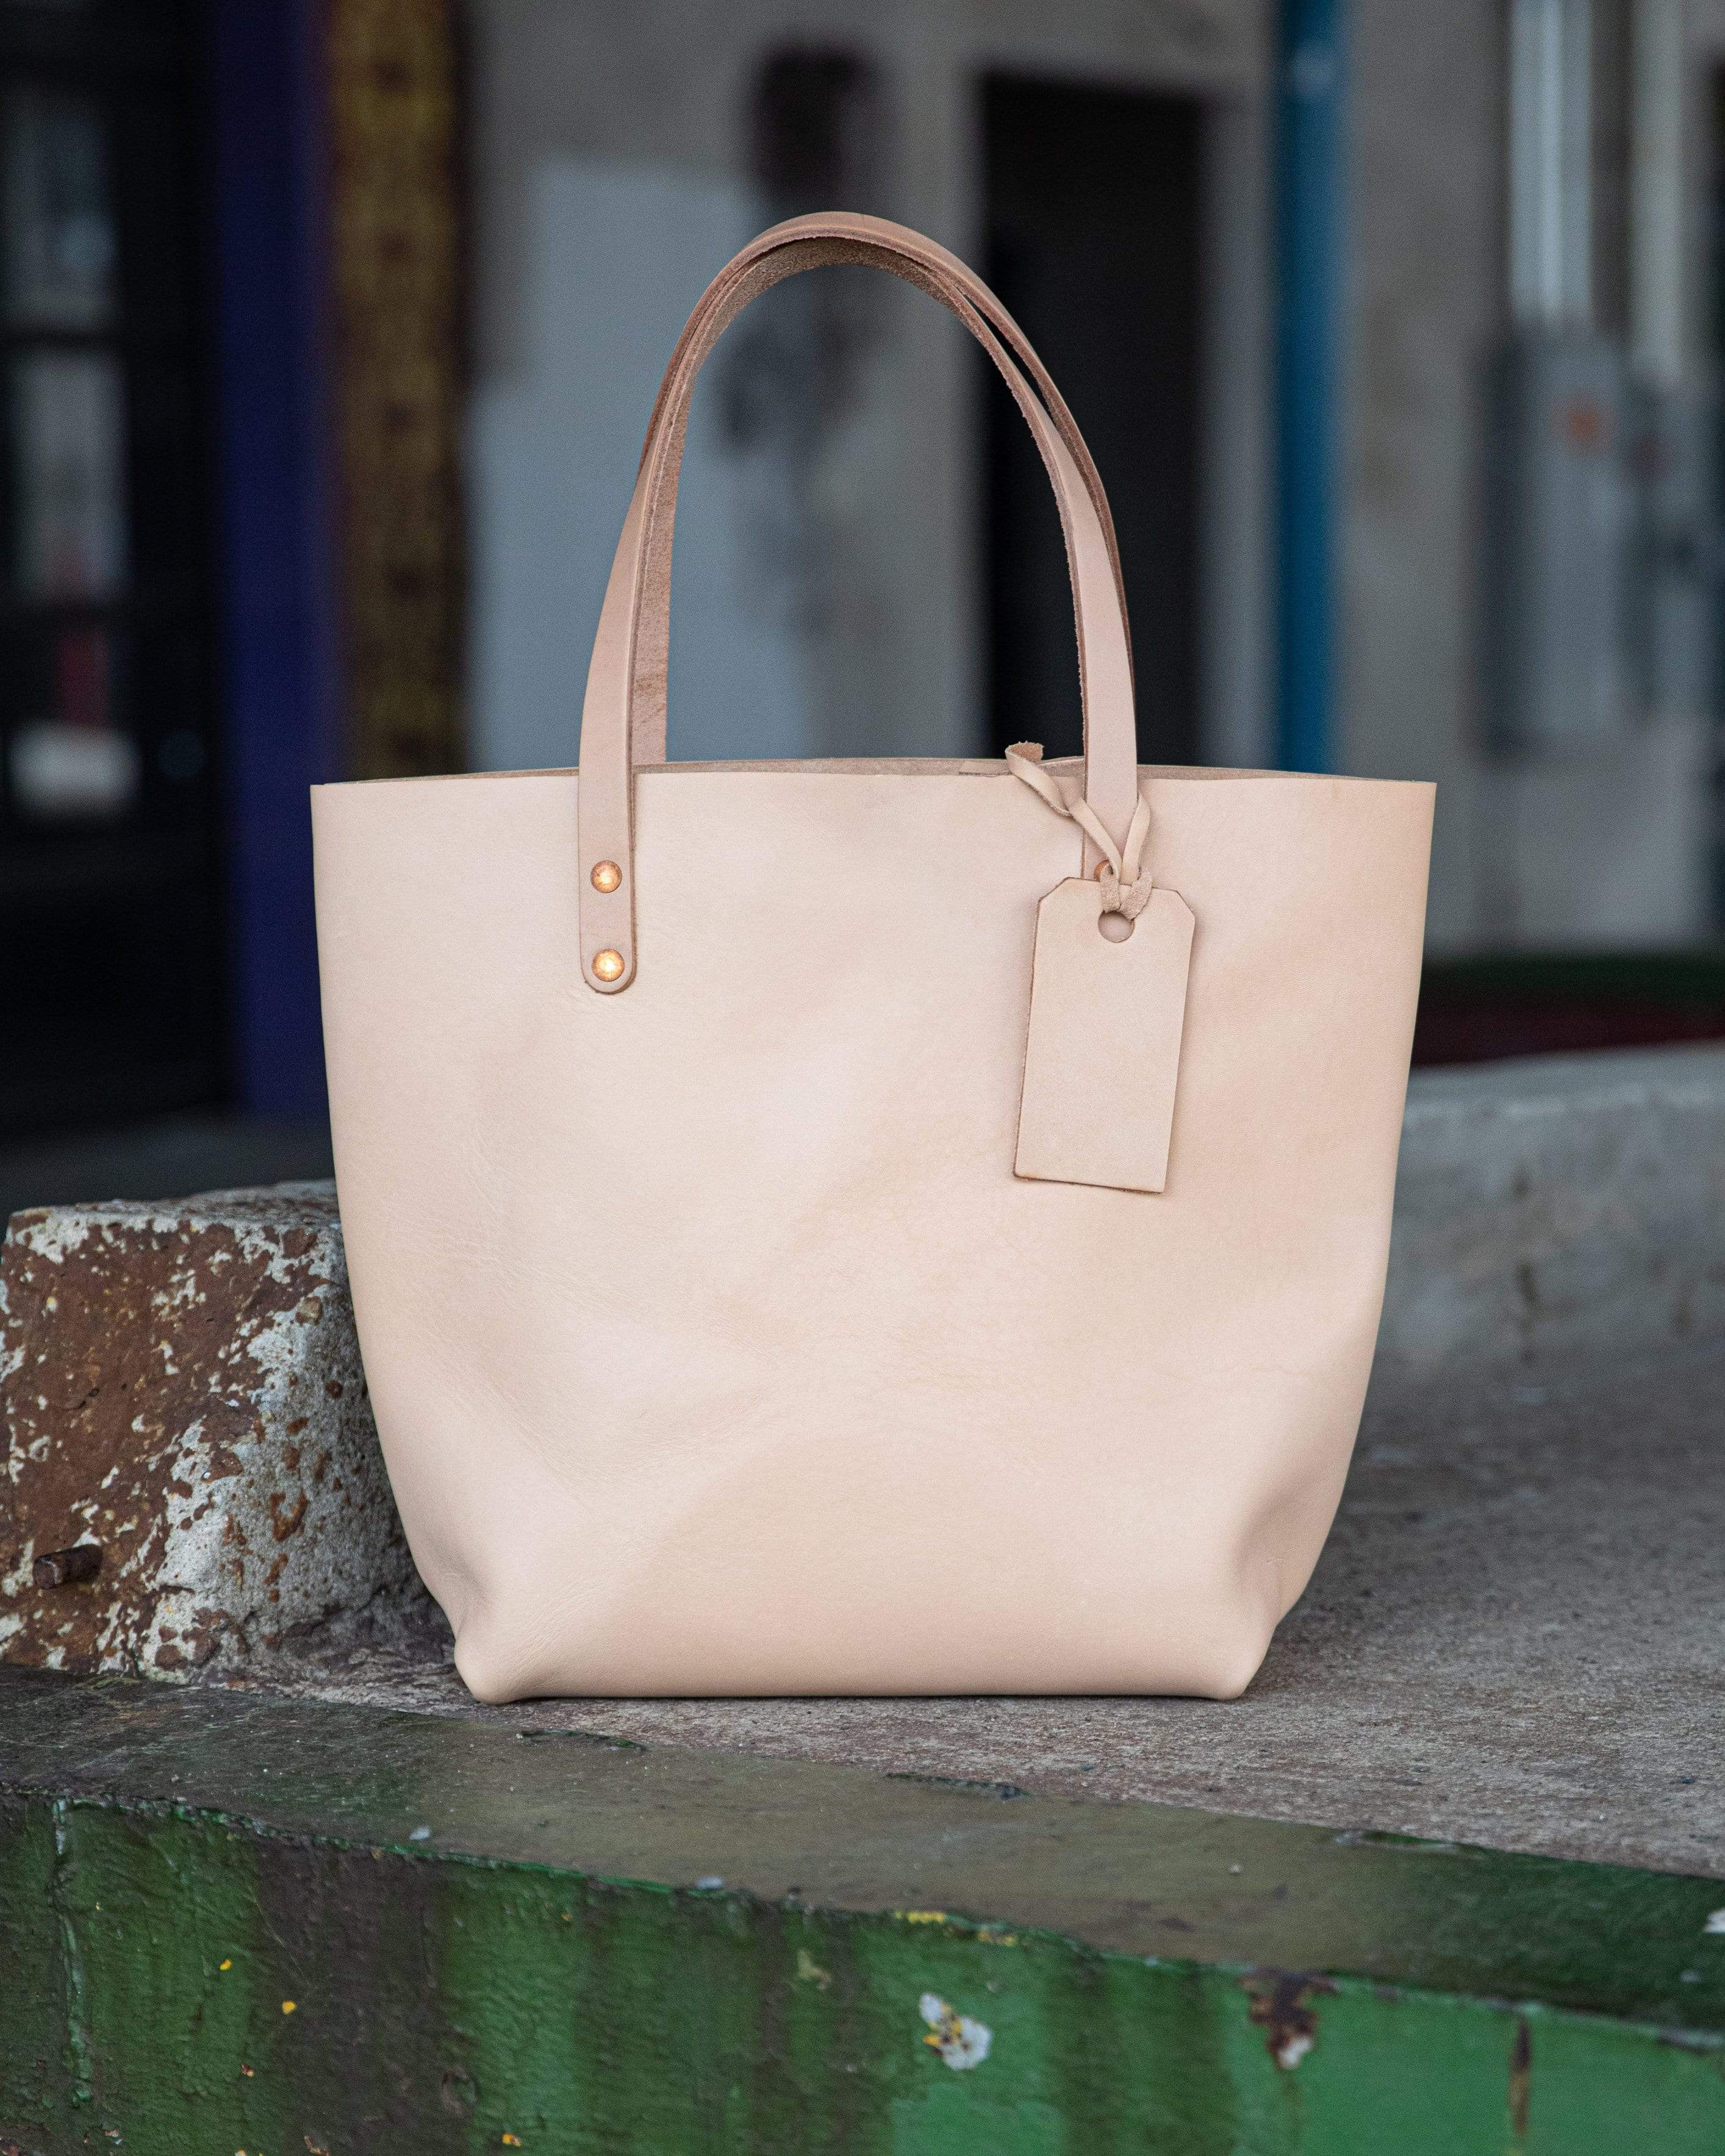 Nisolo - They're back! We just restocked your favorite bags in natural  vachetta. Natural vachetta leather is vegetable tanned leather with a  natural or unfinished surface that develops a patina over time.